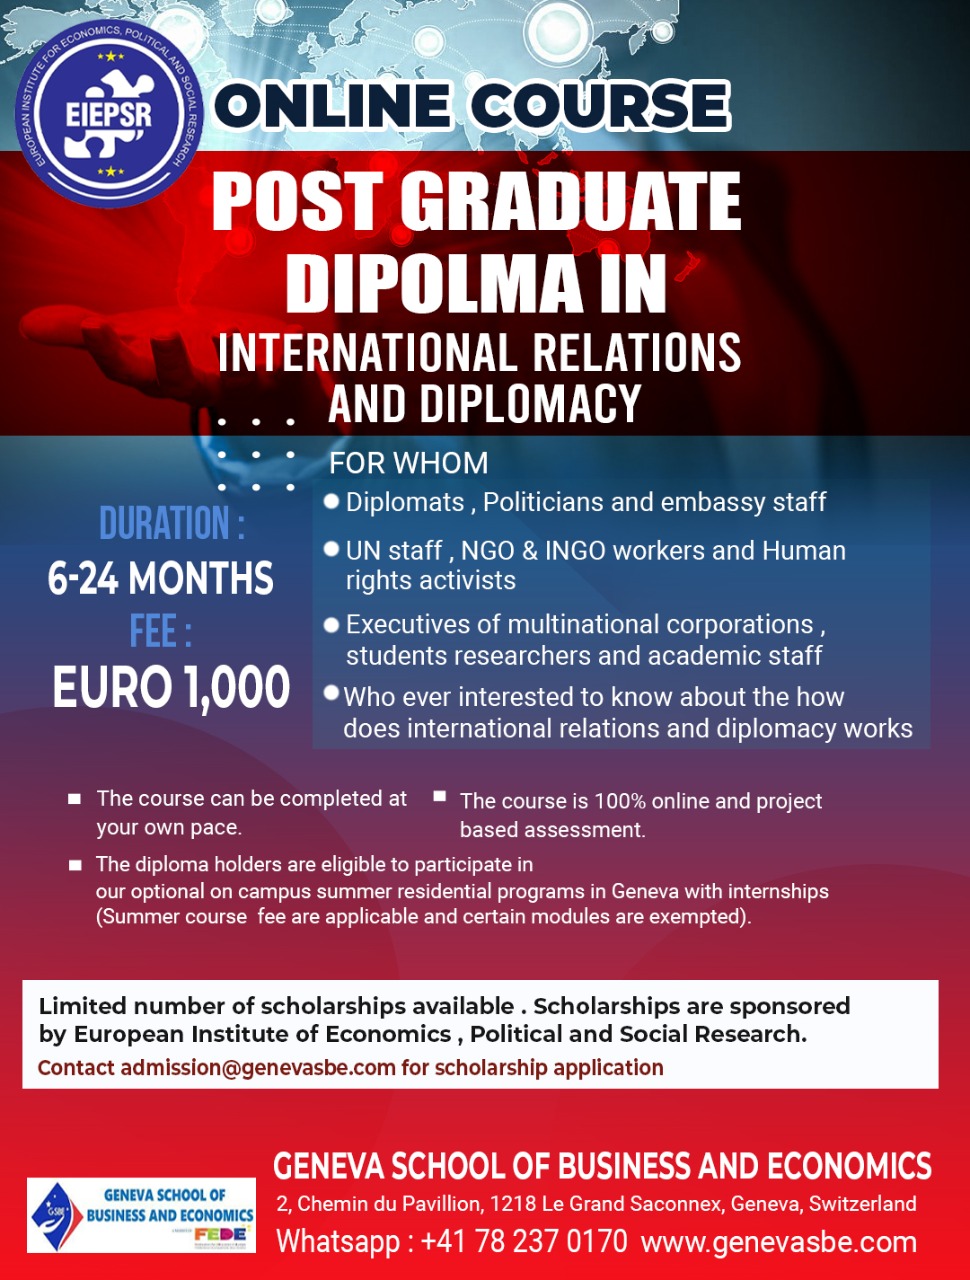 DIPLOMA IN INTERNATIONAL RELATIONS AND DIPLOMACY